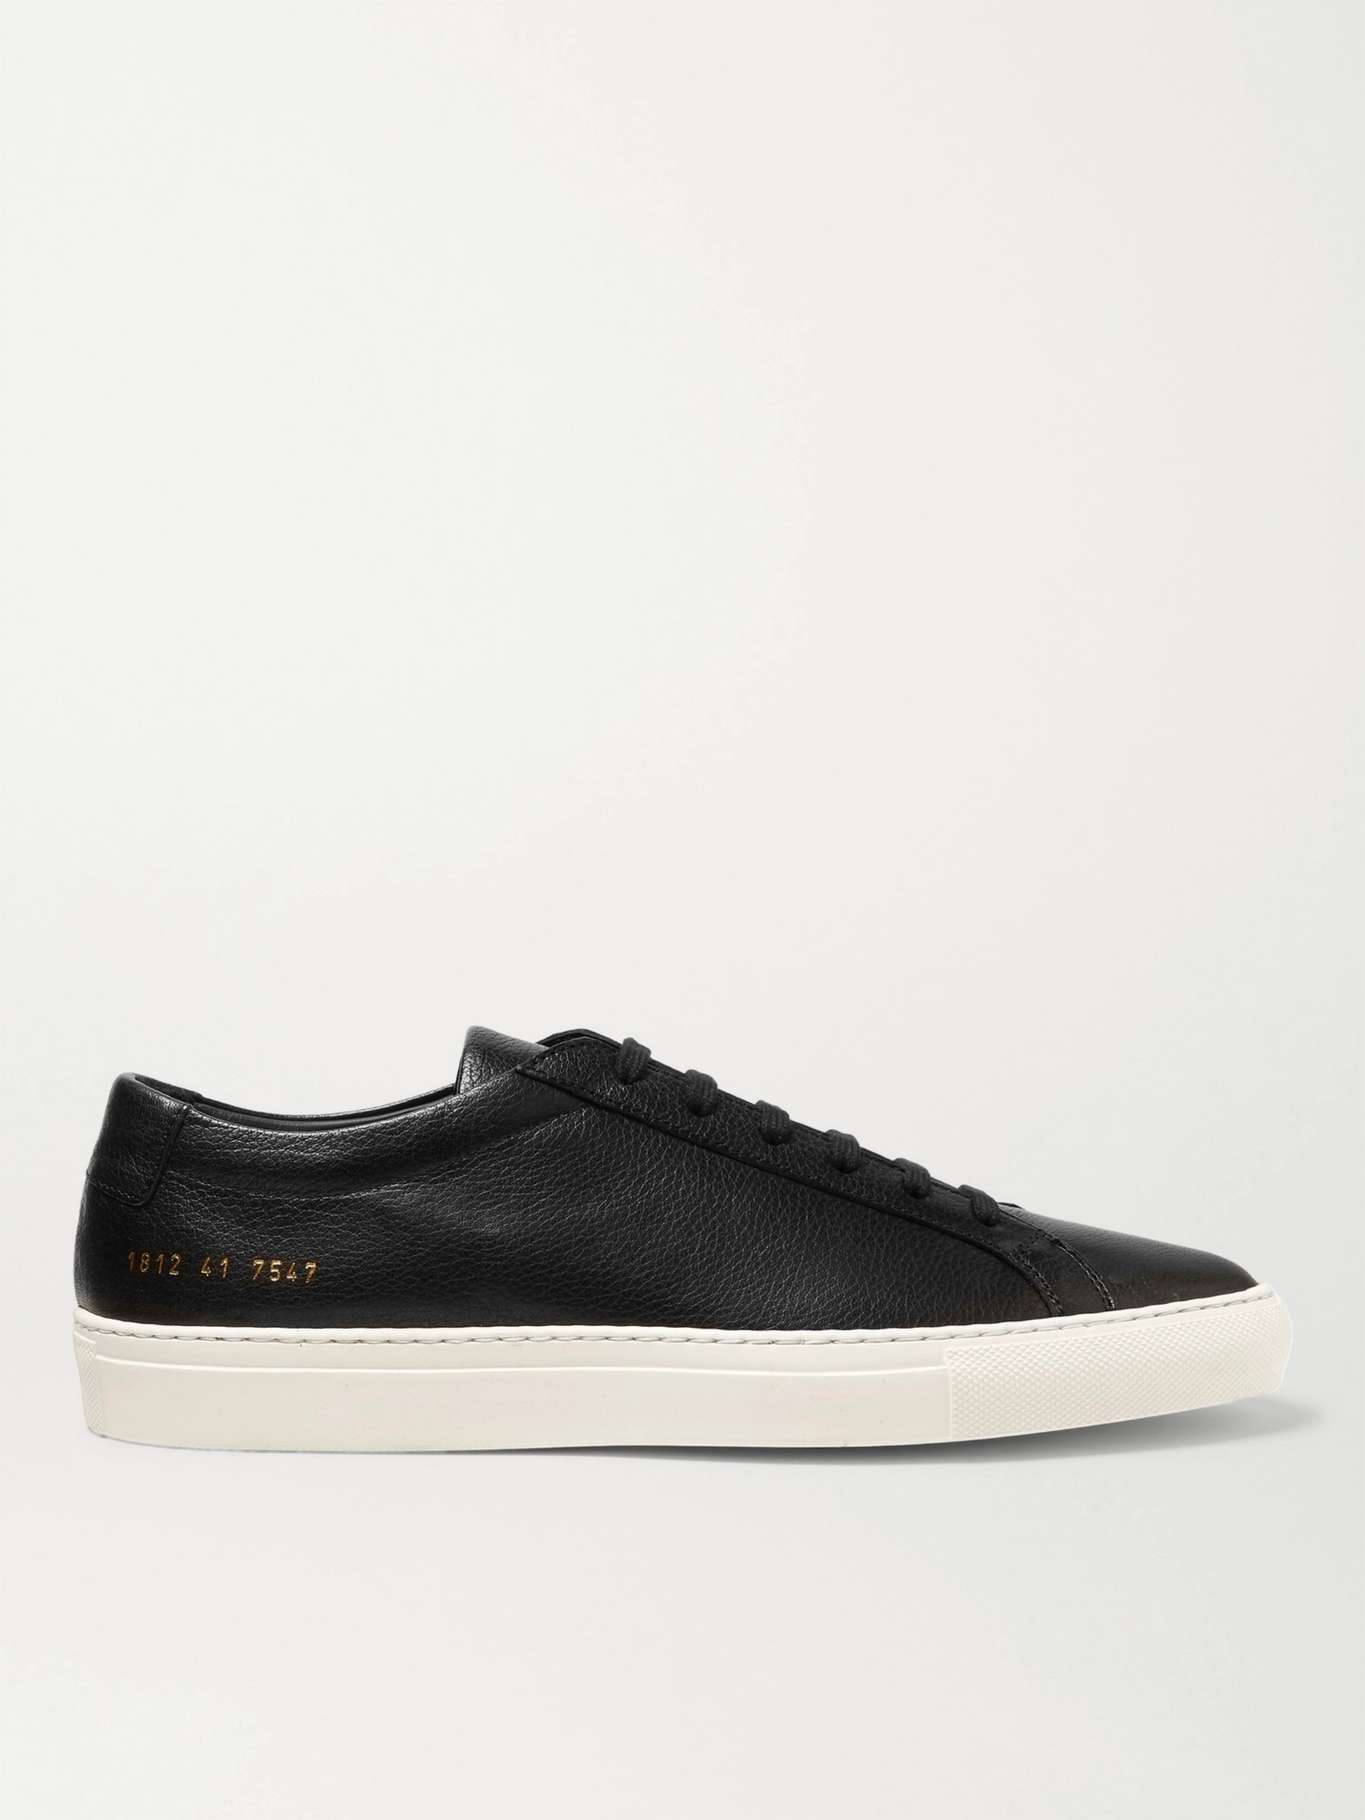 Black Original Achilles Full-Grain Leather Sneakers | COMMON PROJECTS ...